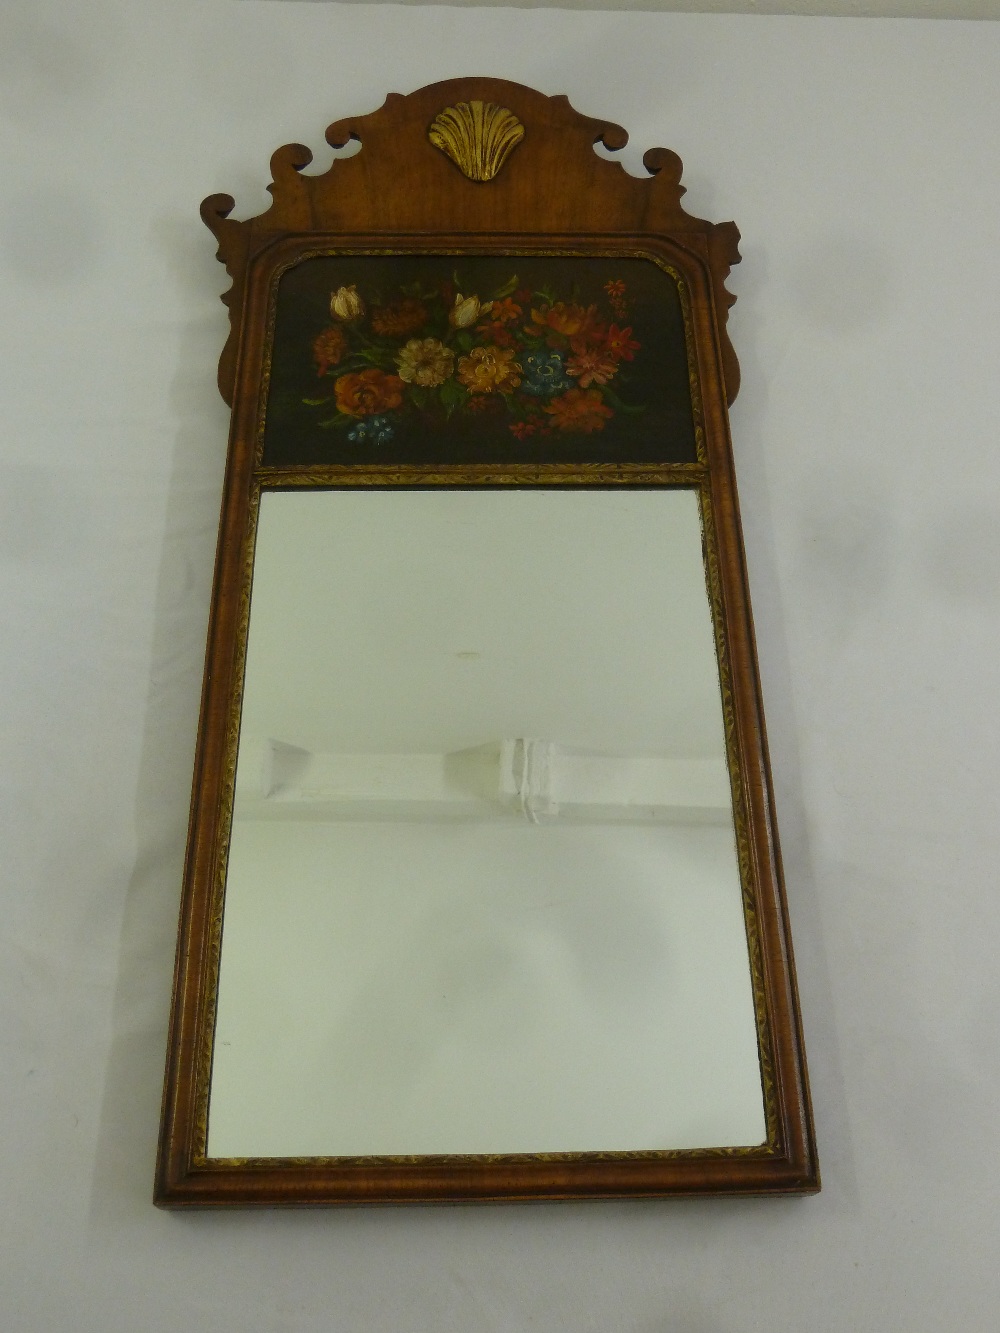 An early 20th century rectangular wall mirror with painted floral still life and applied shell